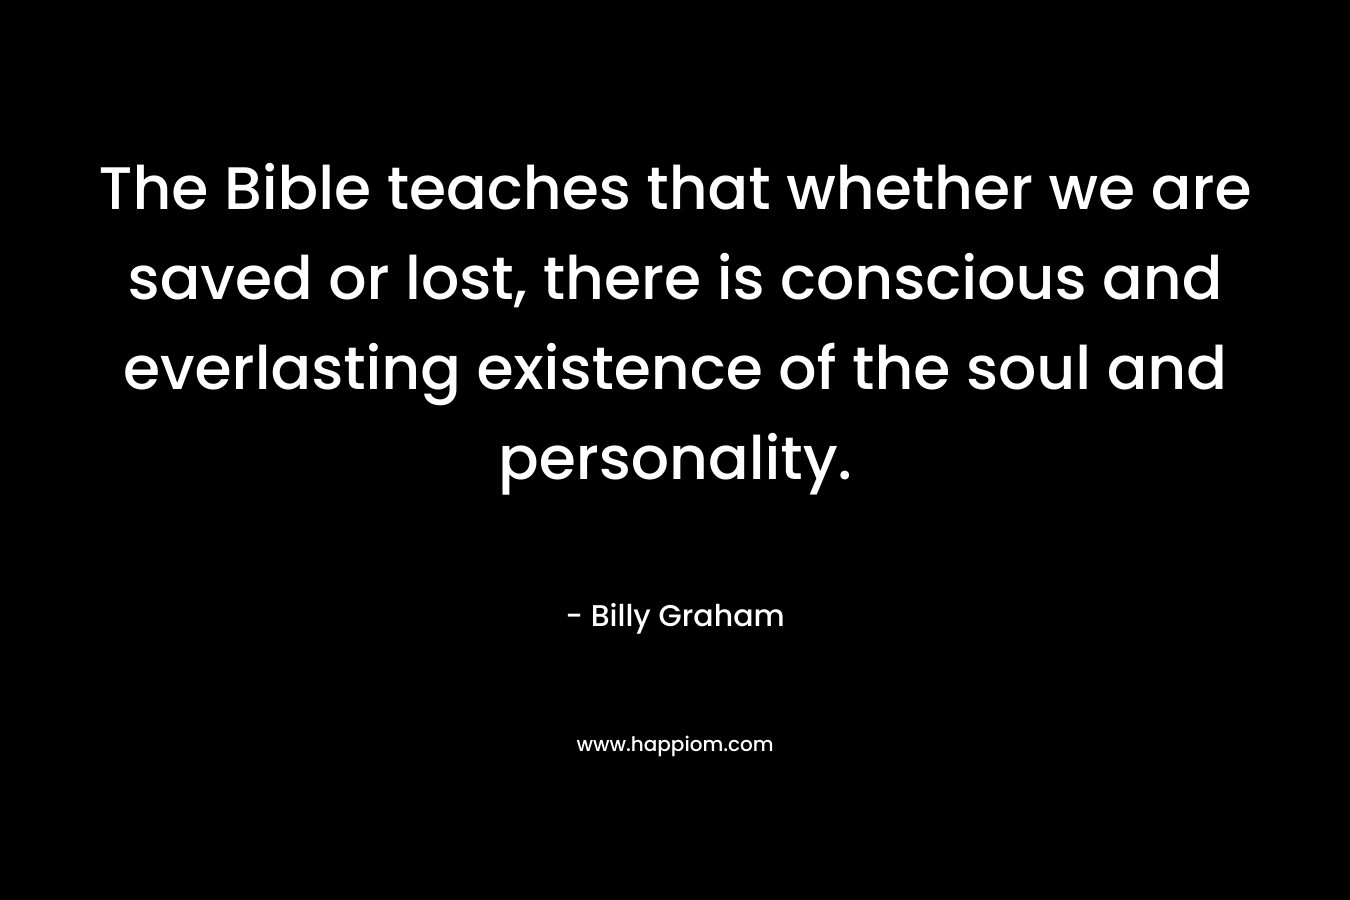 The Bible teaches that whether we are saved or lost, there is conscious and everlasting existence of the soul and personality. – Billy Graham